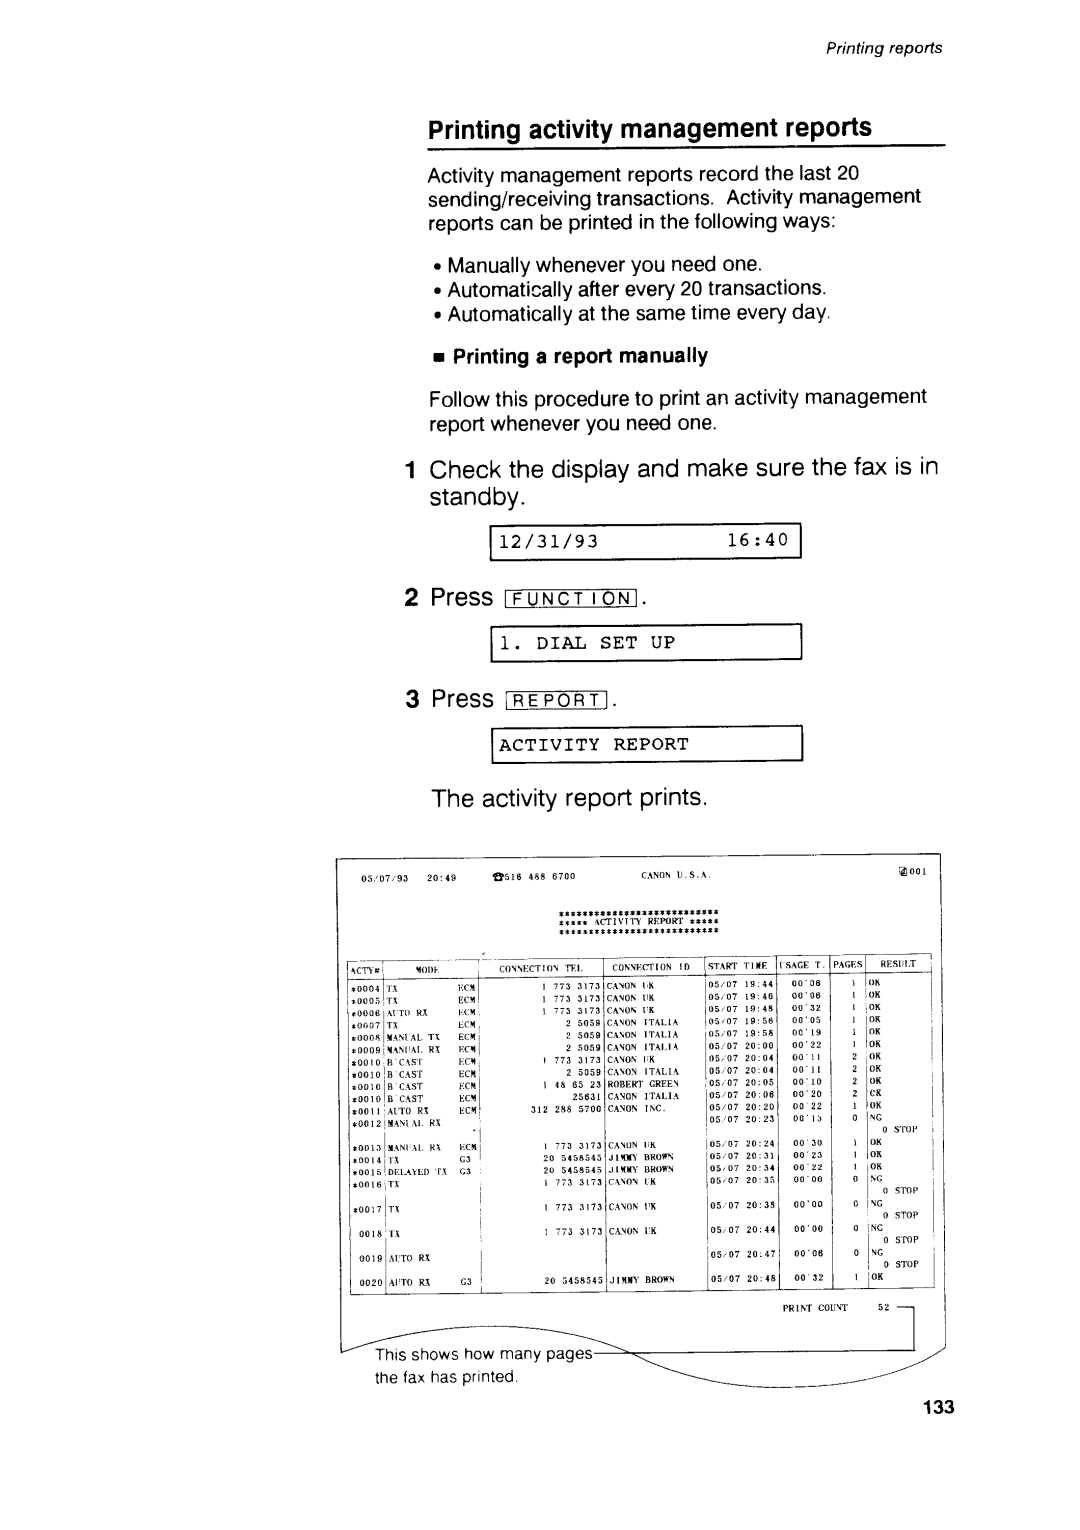 Canon B75 manual Printingactivitymanagementreports, PressITnxETToxl, Checkthe displayand makesurethe fax is in standby 